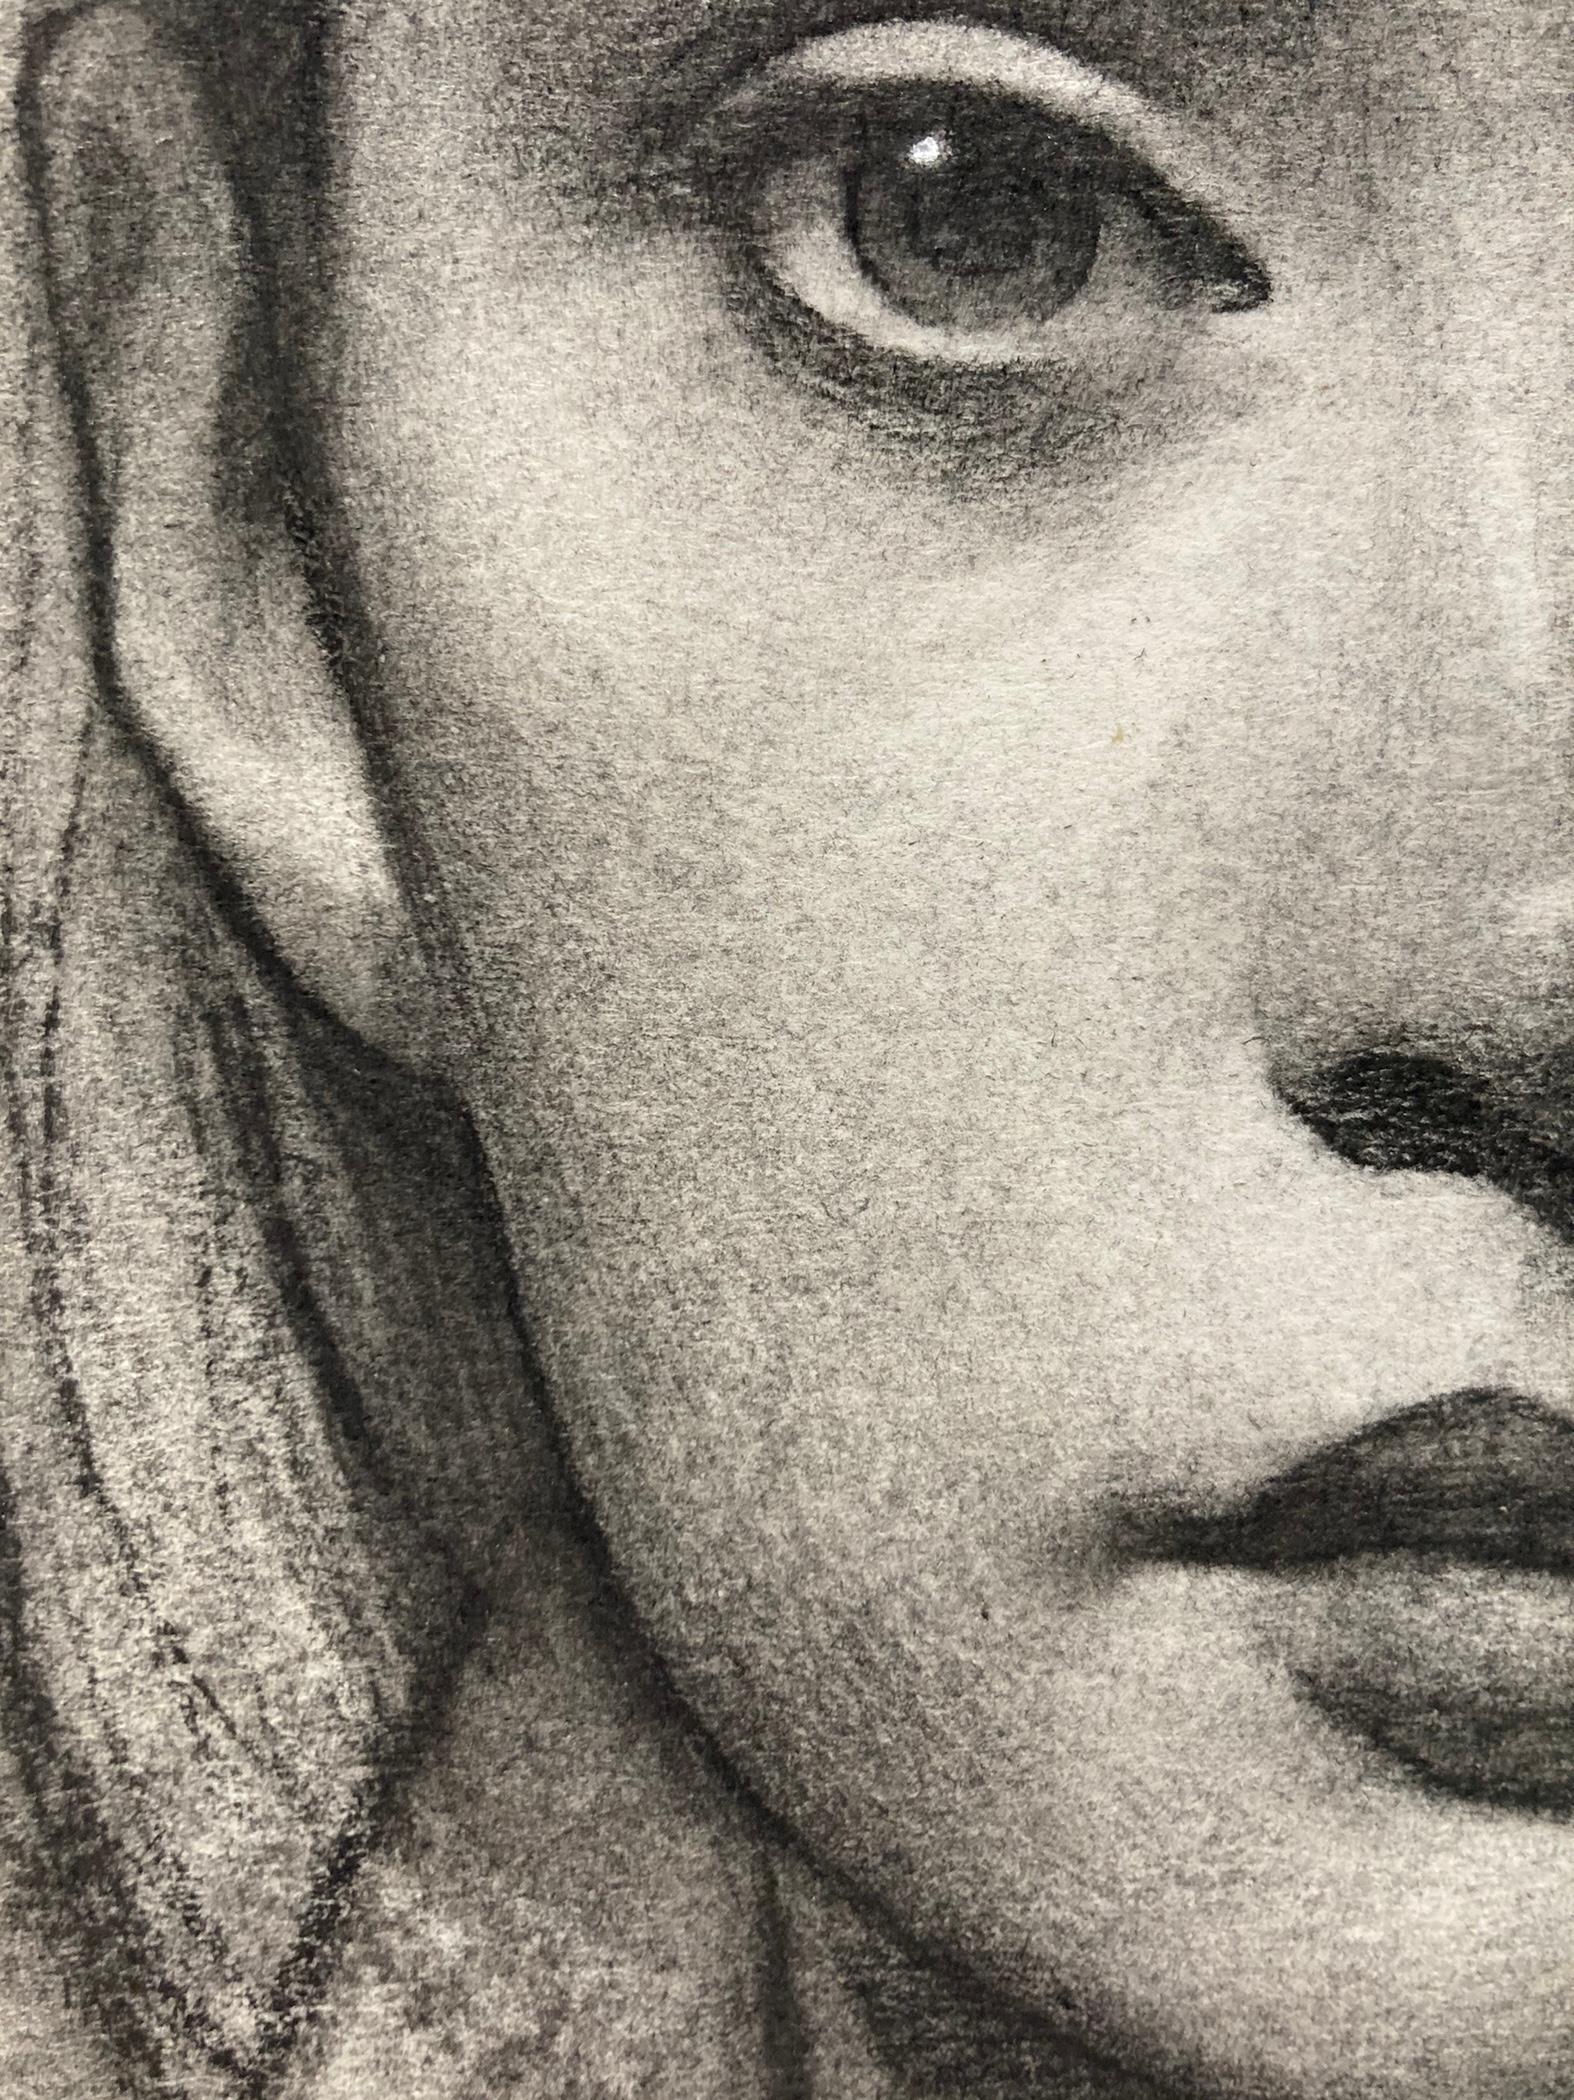 A charcoal portrait drawing of a young woman. 

